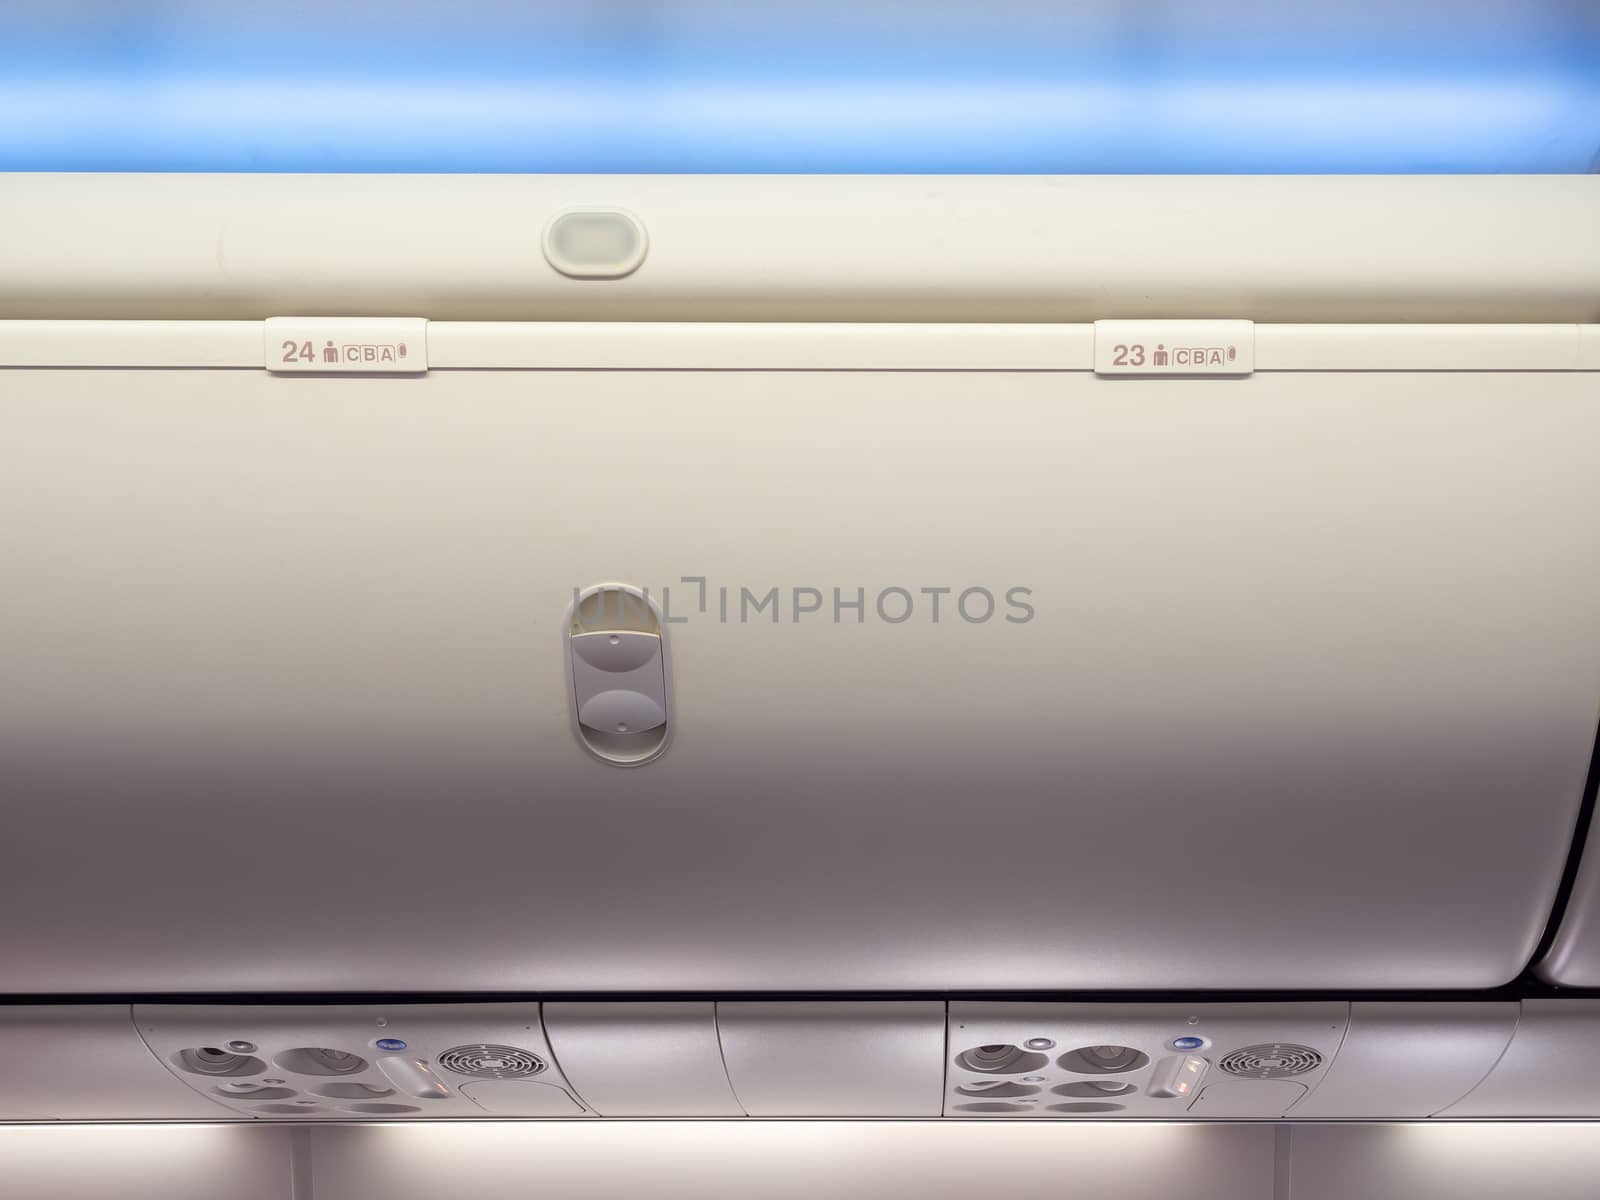 Hand-luggage compartment number 23 and 24 in cabin economy class on the low cost commercial airplane.